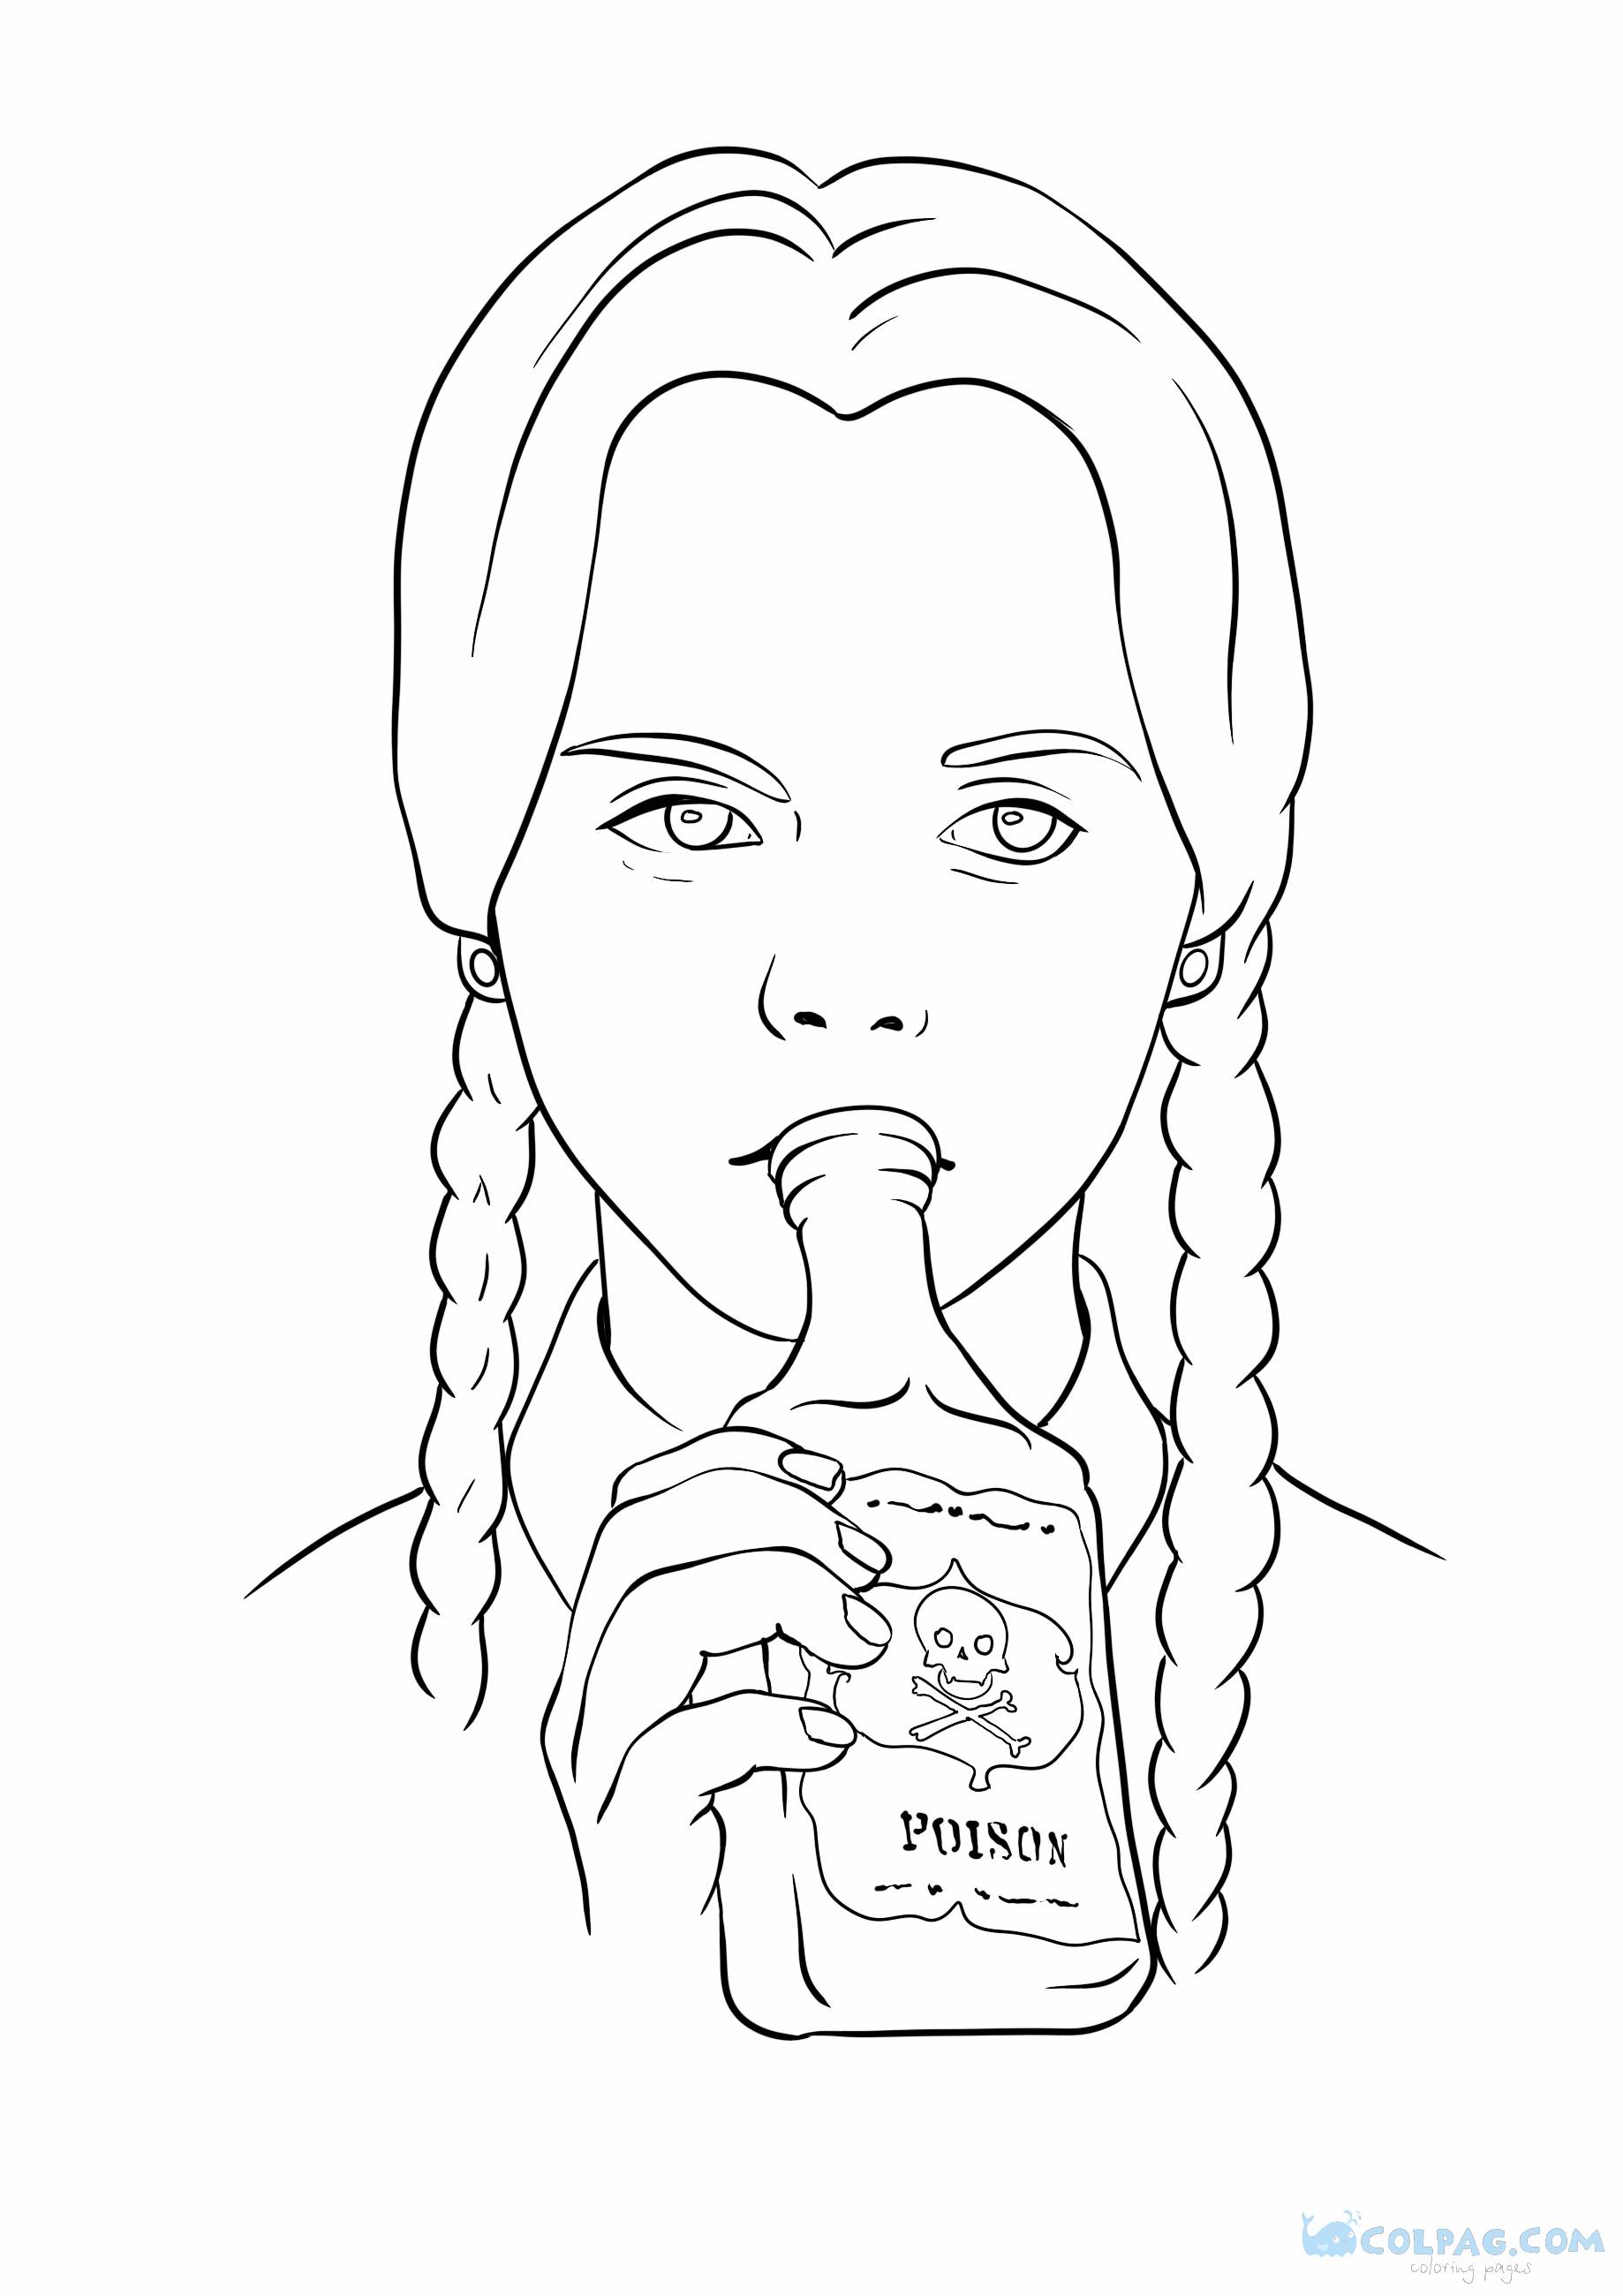 wednesday-addams-coloring-page-colpag-com-11